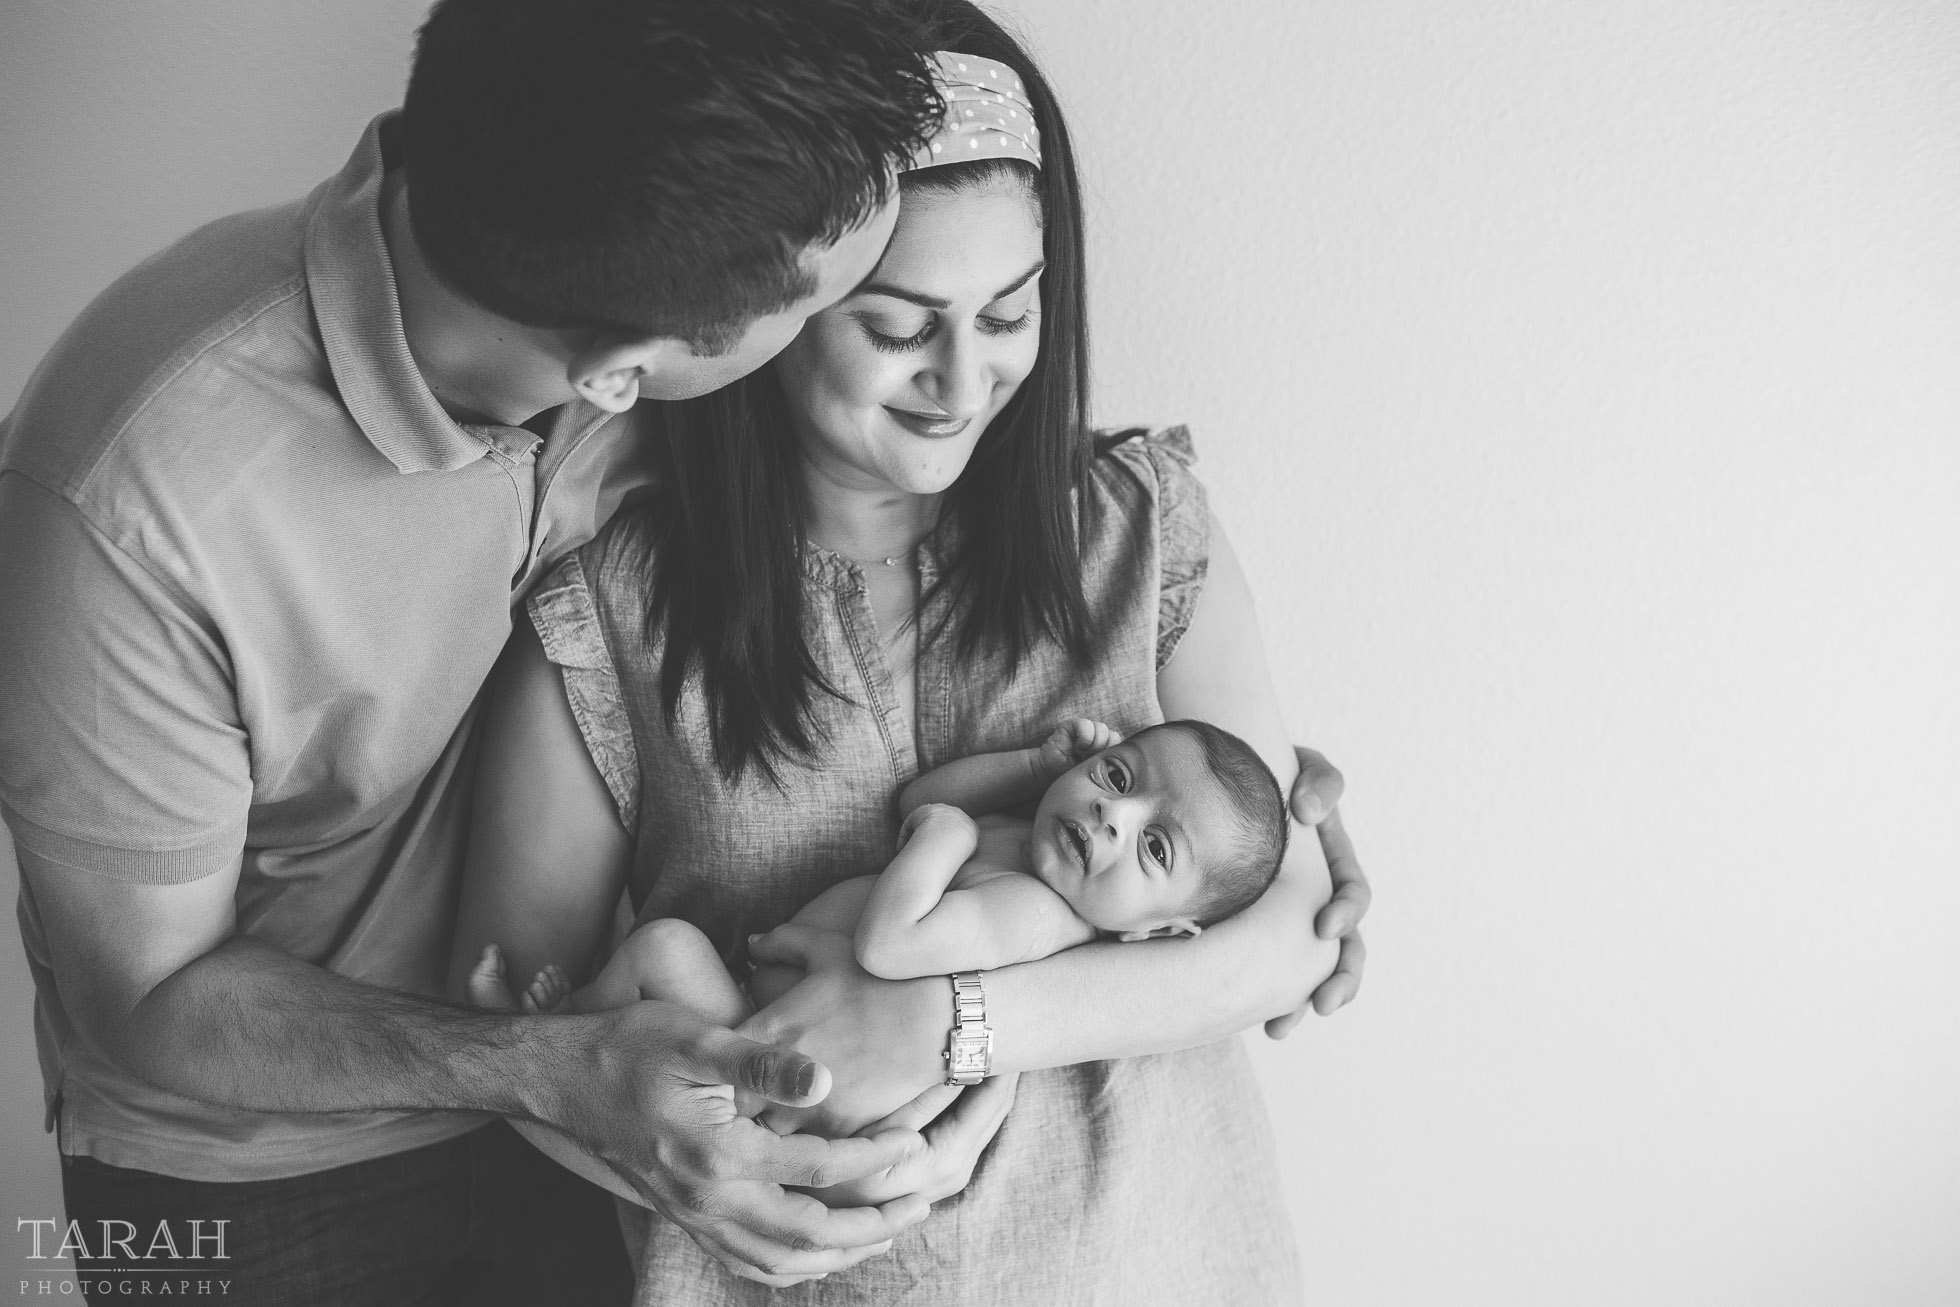 Family of 4 poses with baby | Photography poses family, Family picture poses,  Family photoshoot poses